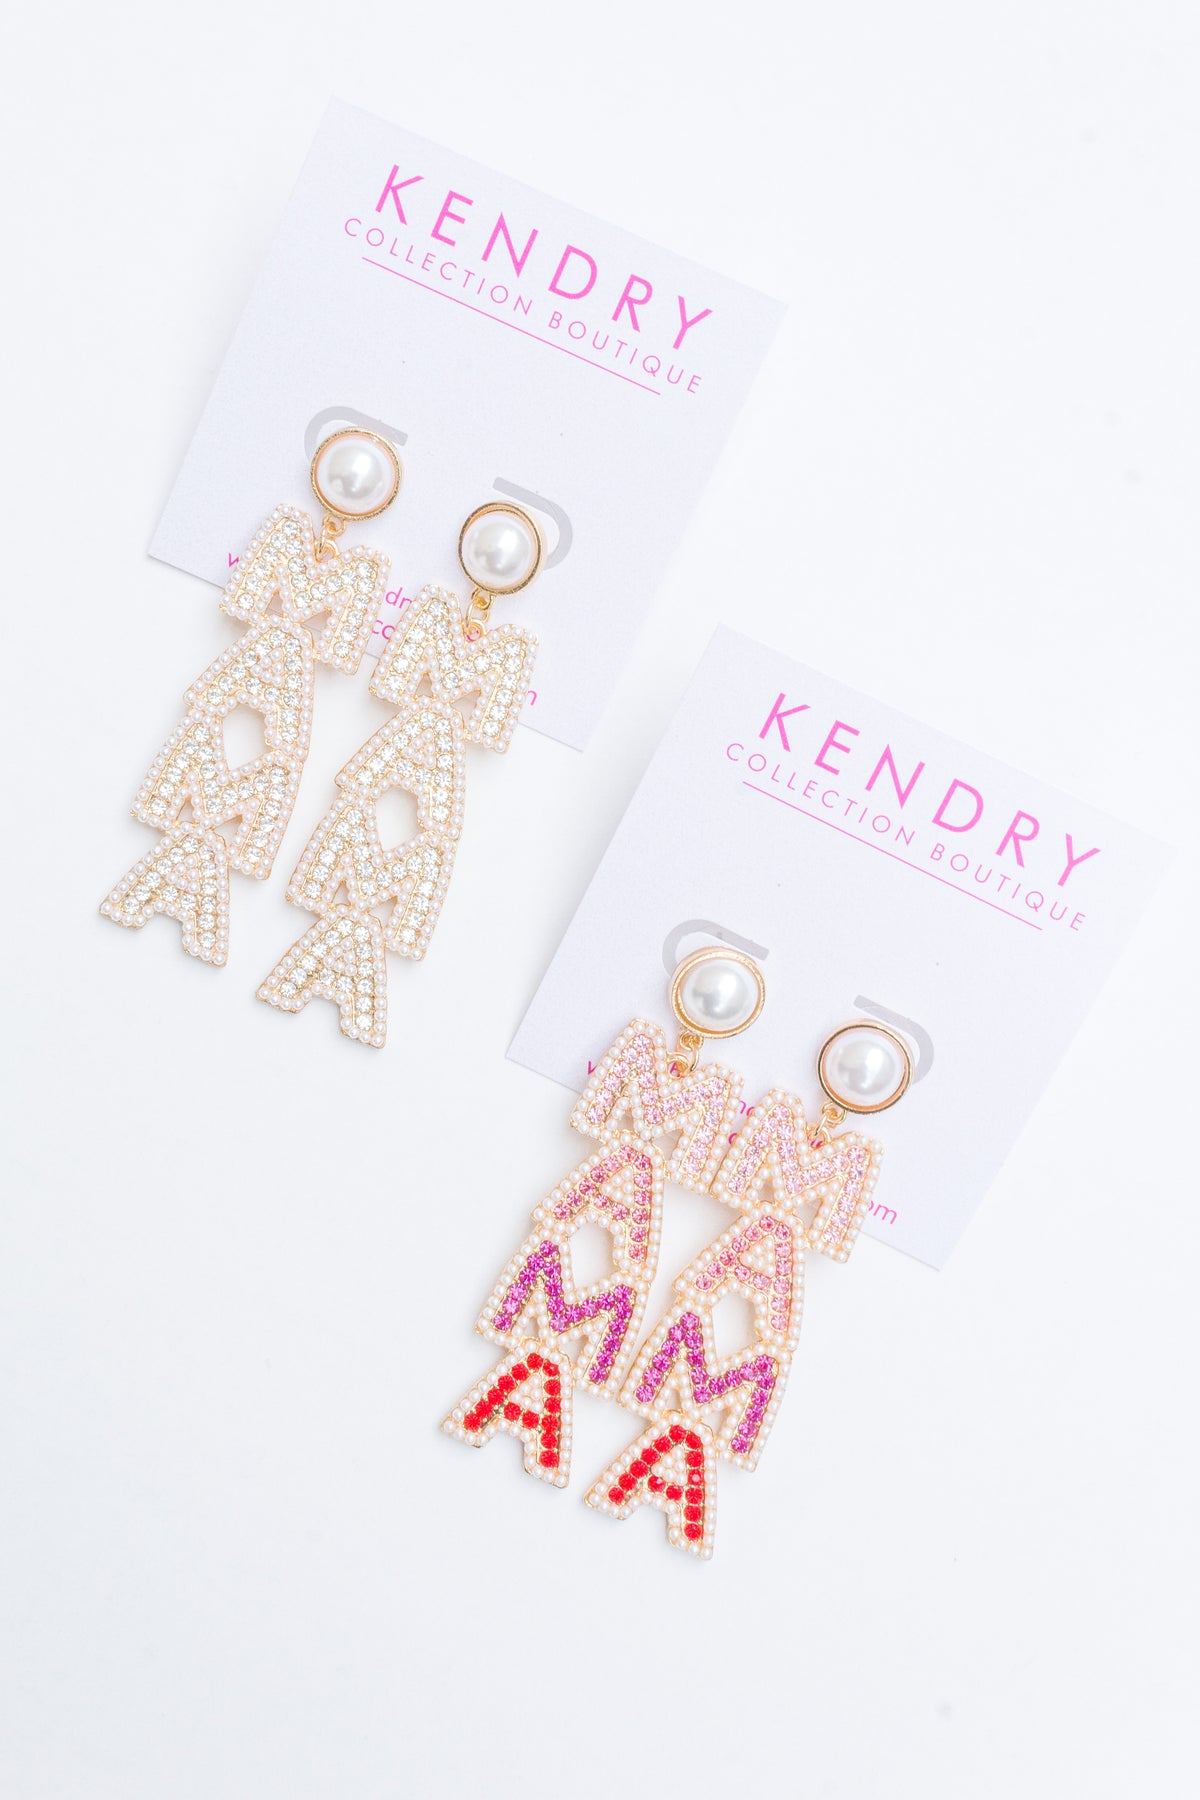 Cute Statement Earrings Perfect To Wear With Any Outfit! Shop The Best Earrings For Any Occasion At Kendry Collection Boutique